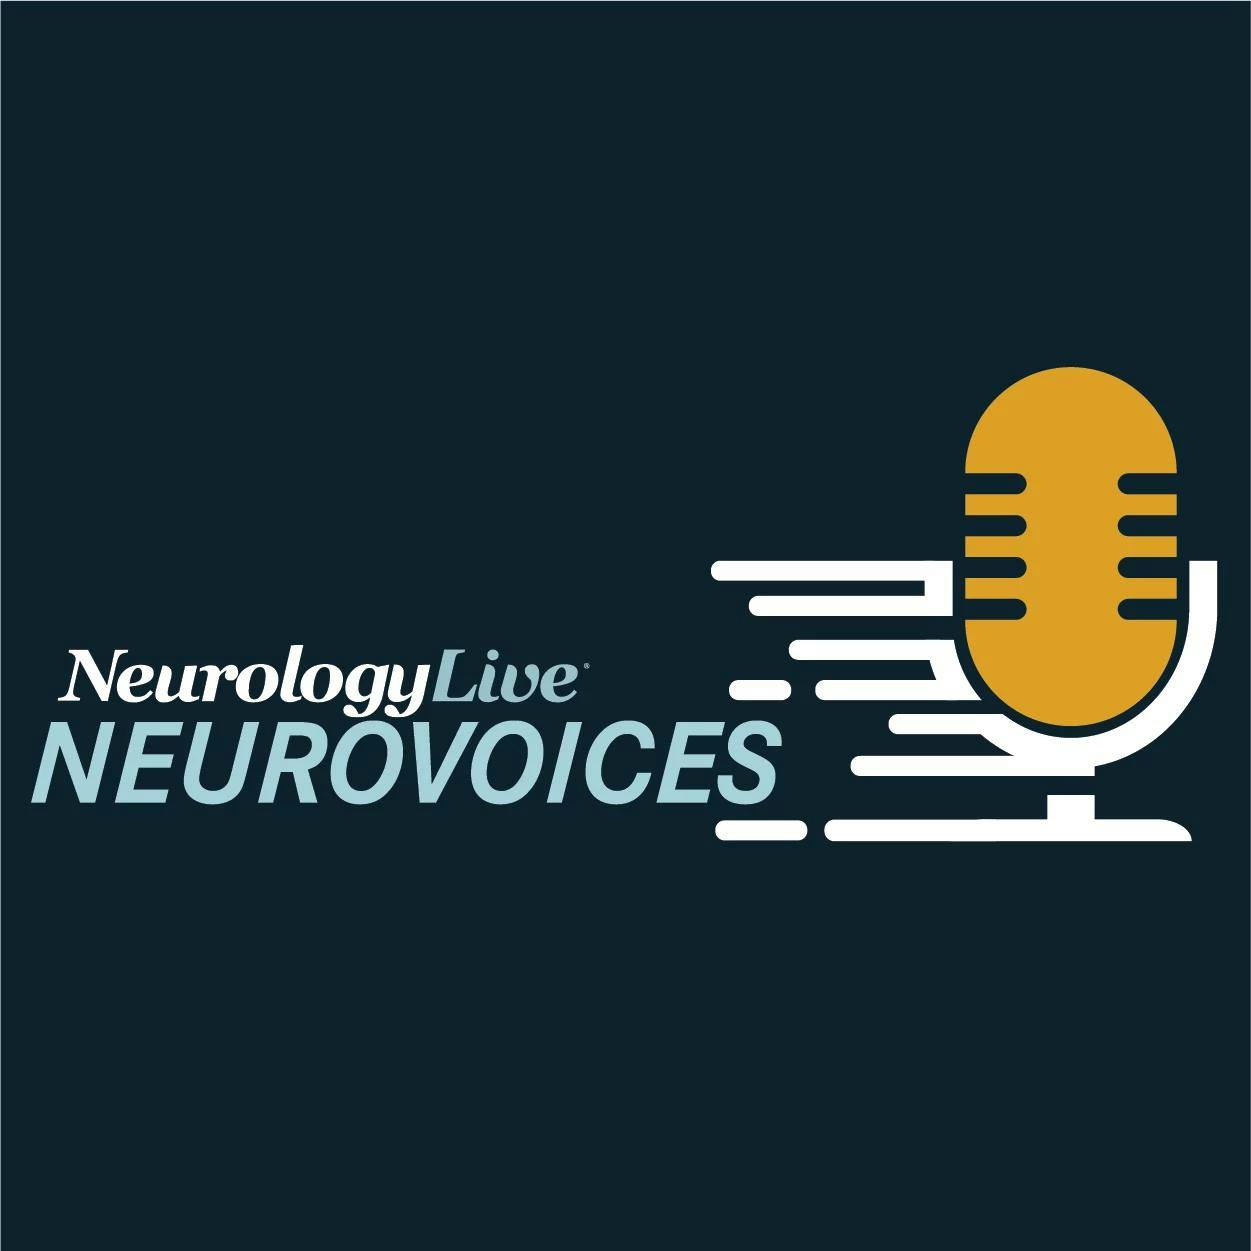 NeuroVoices: Sharon Hesterlee, PhD, on Givinostat’s Approval for Duchenne Muscular Dystrophy, Future Prospects